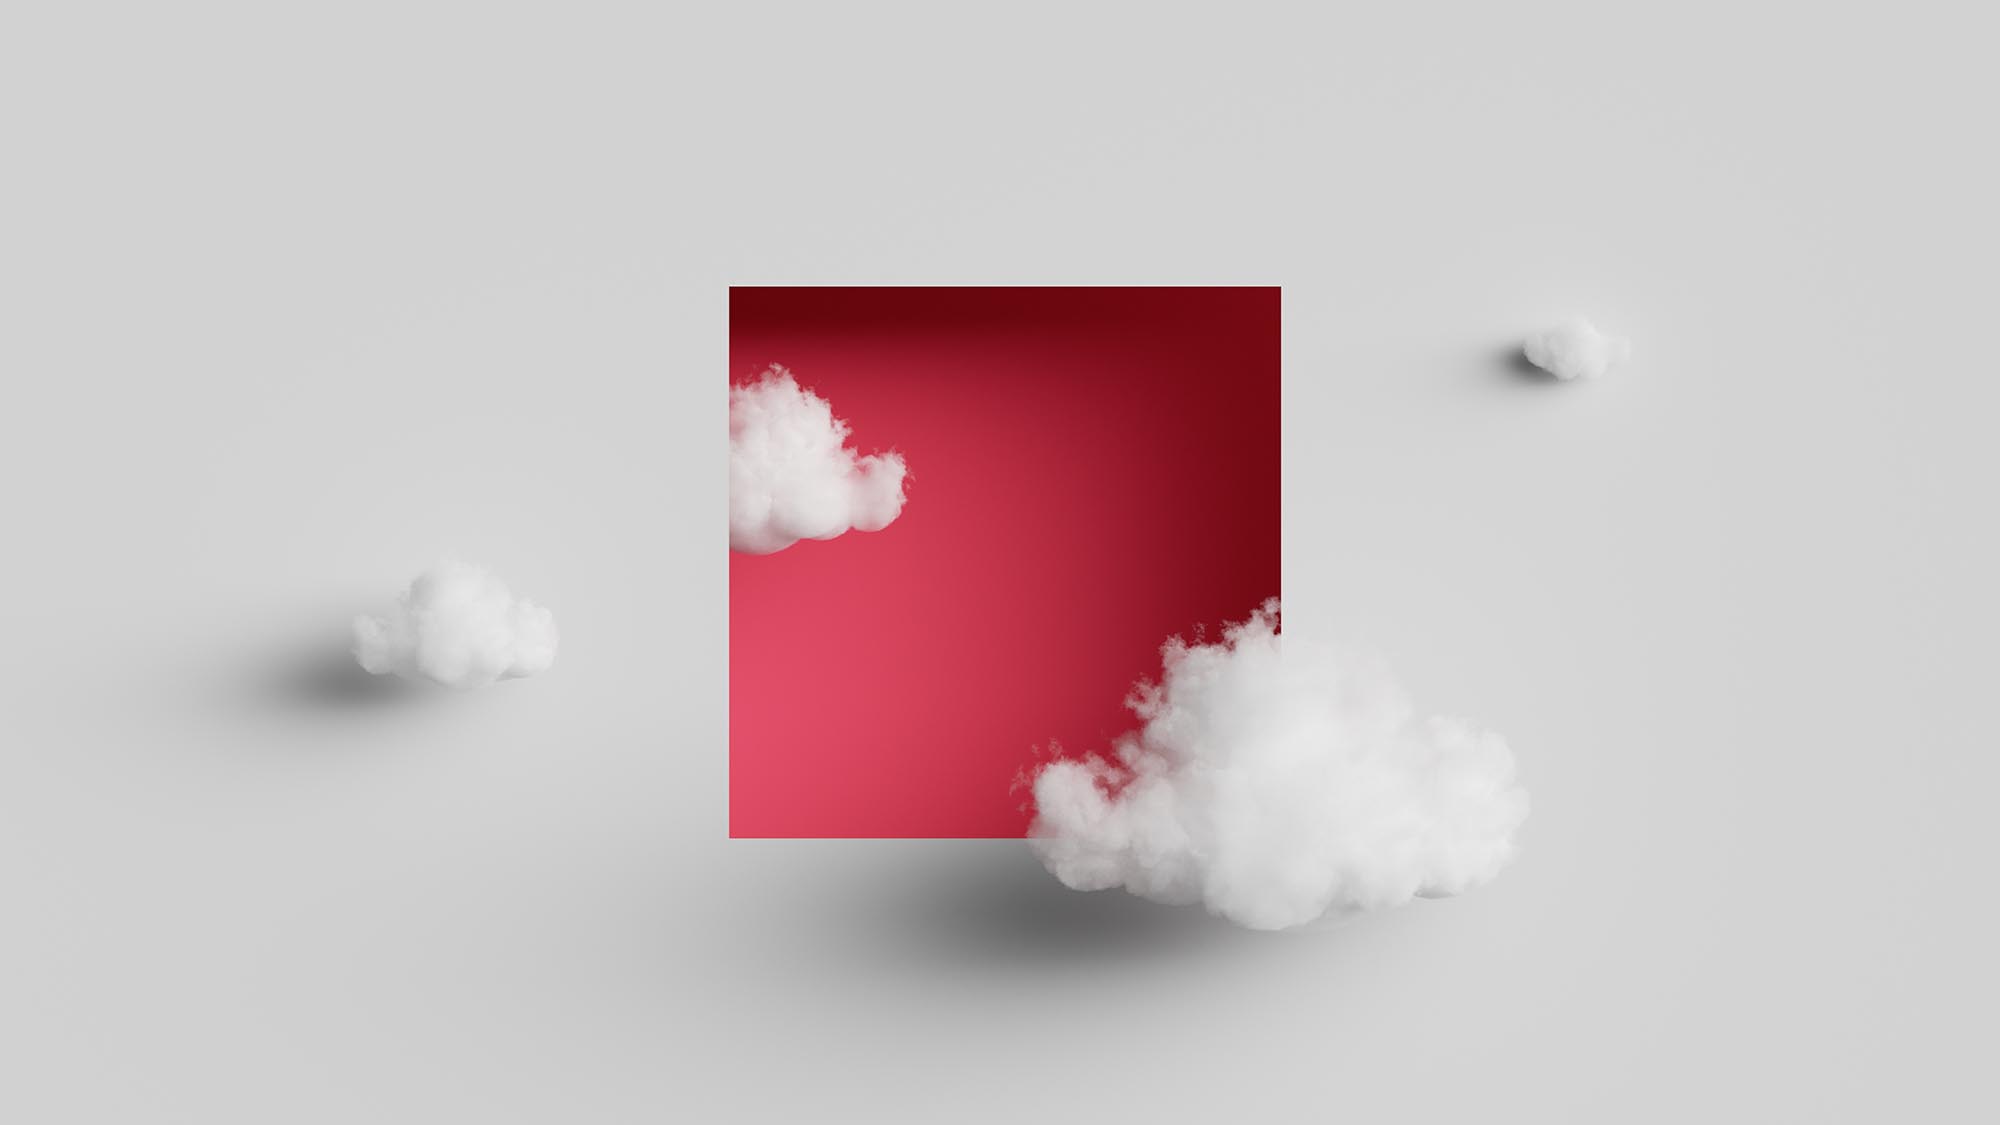 Flying realistic clouds. Red square hole on the white wall.